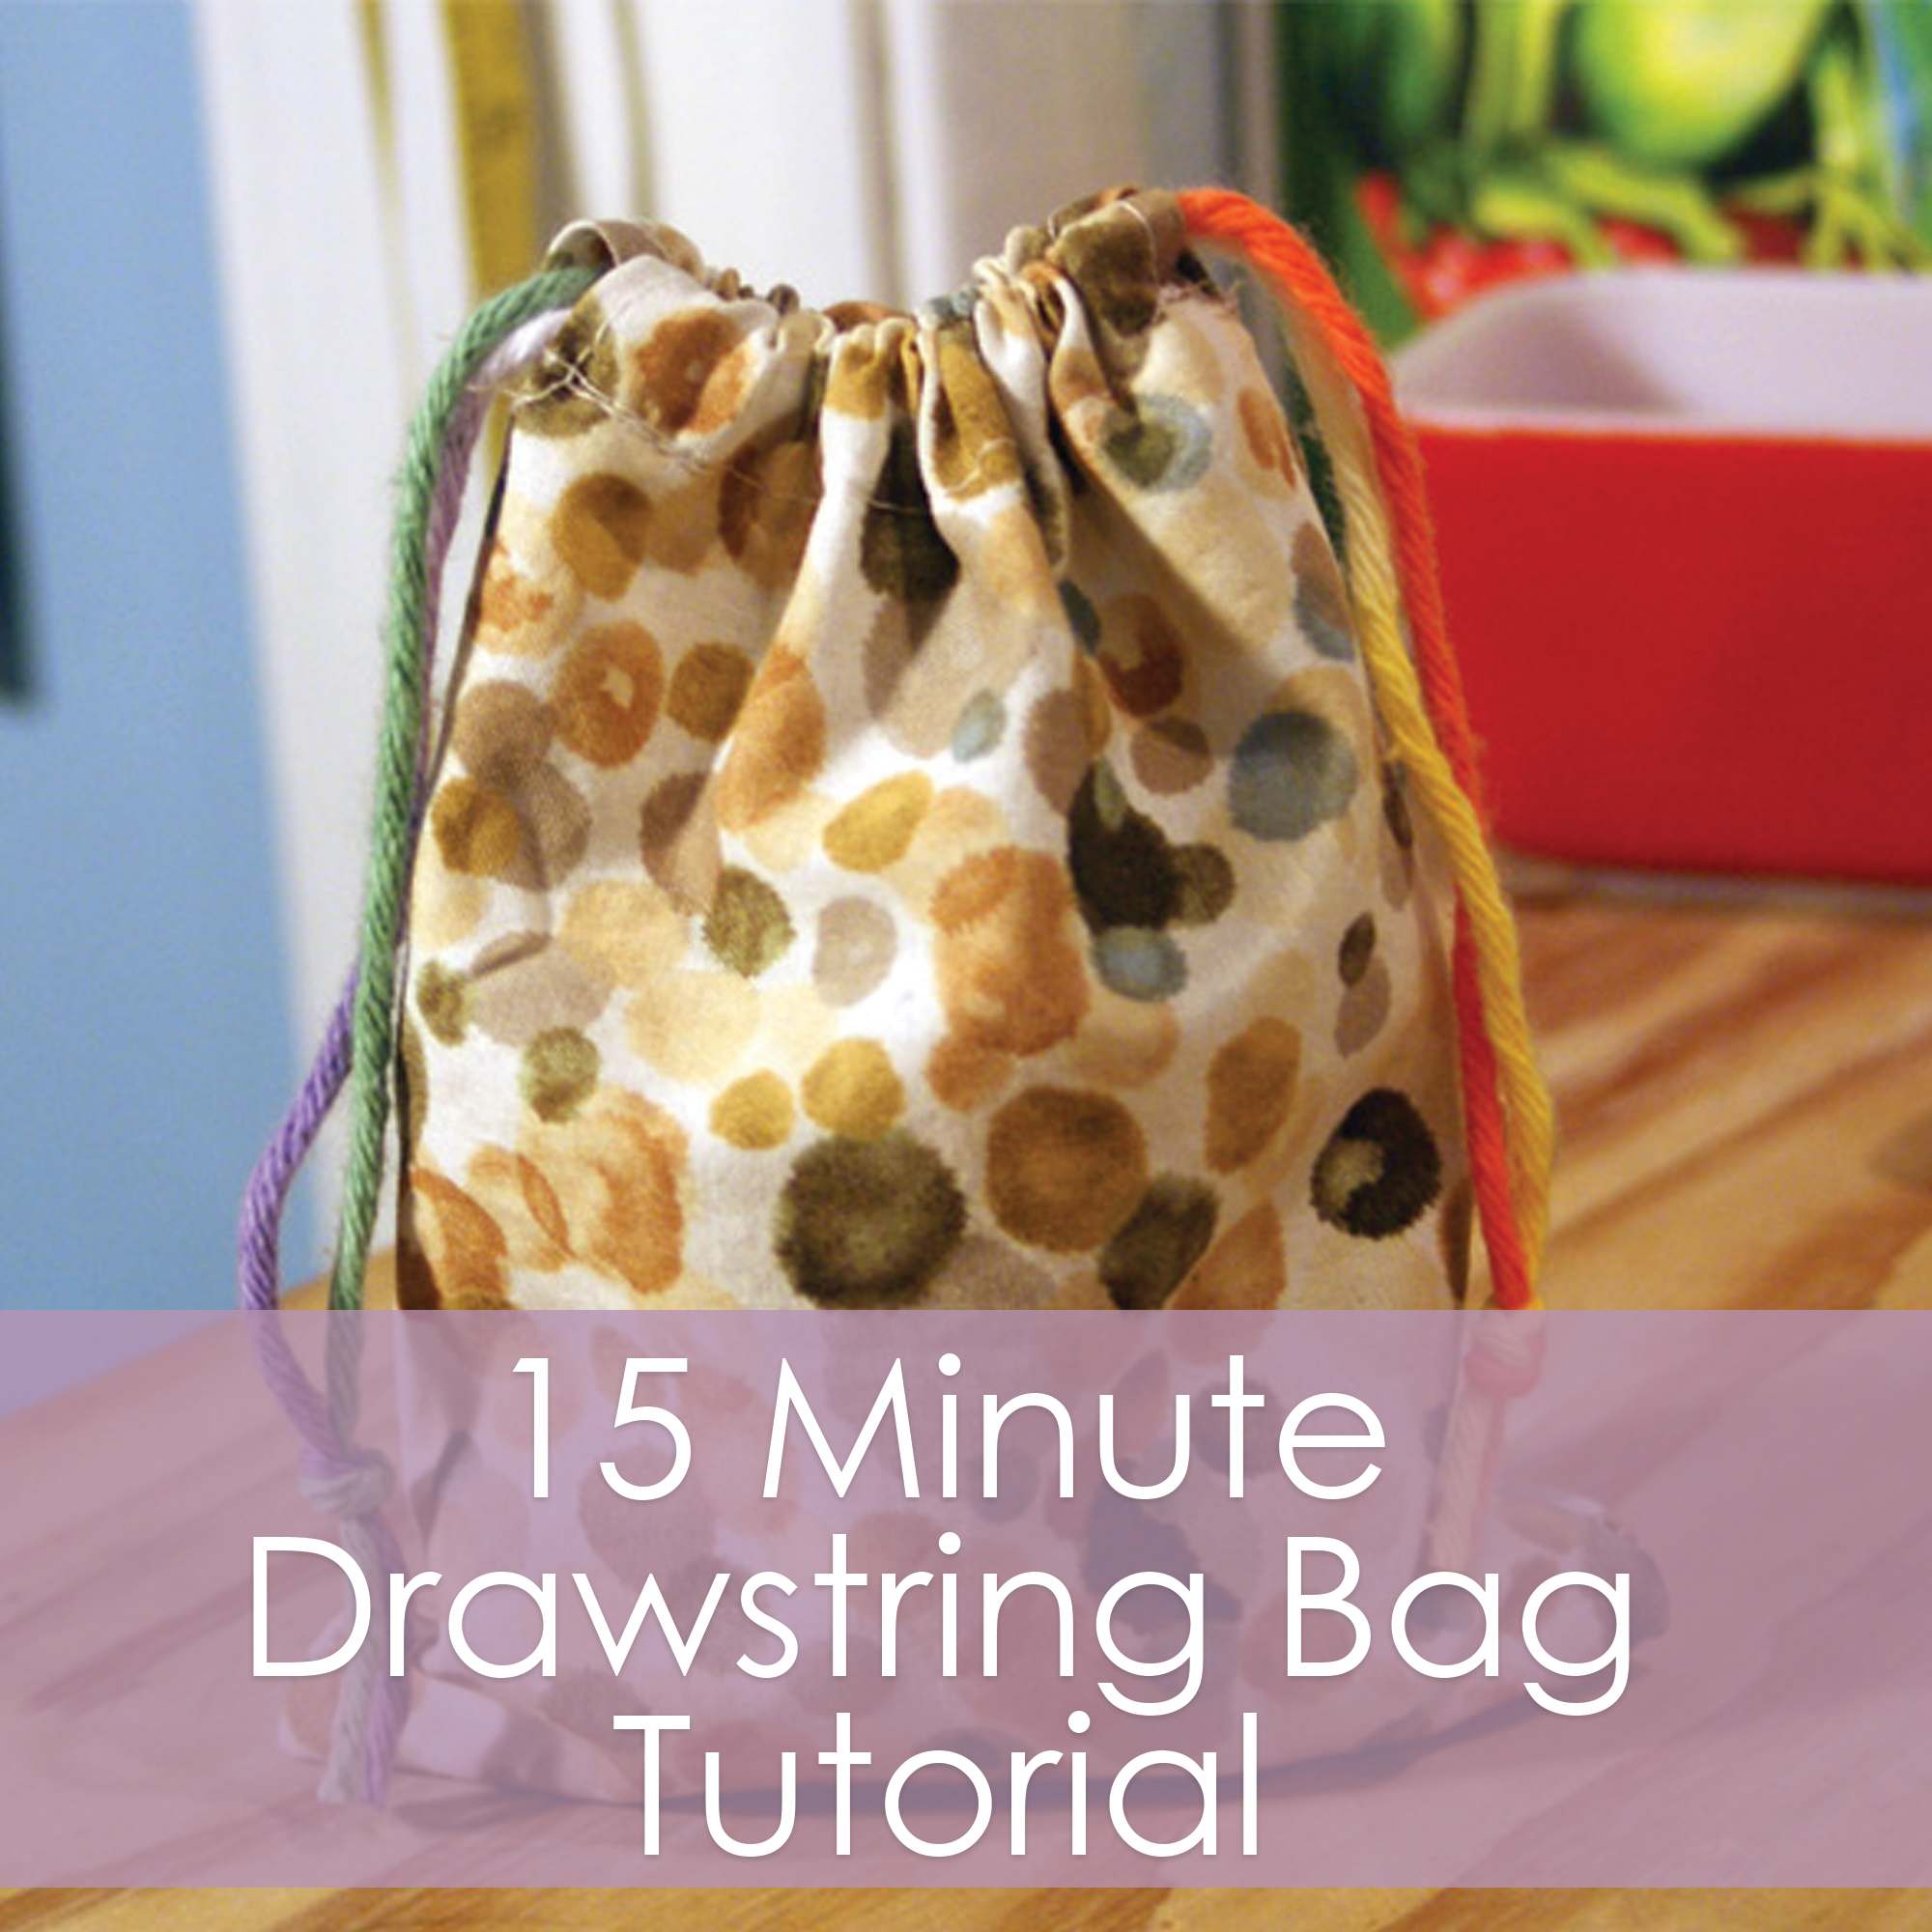 15 Minute Drawstring Bag Tutorial from Muse of the Morning